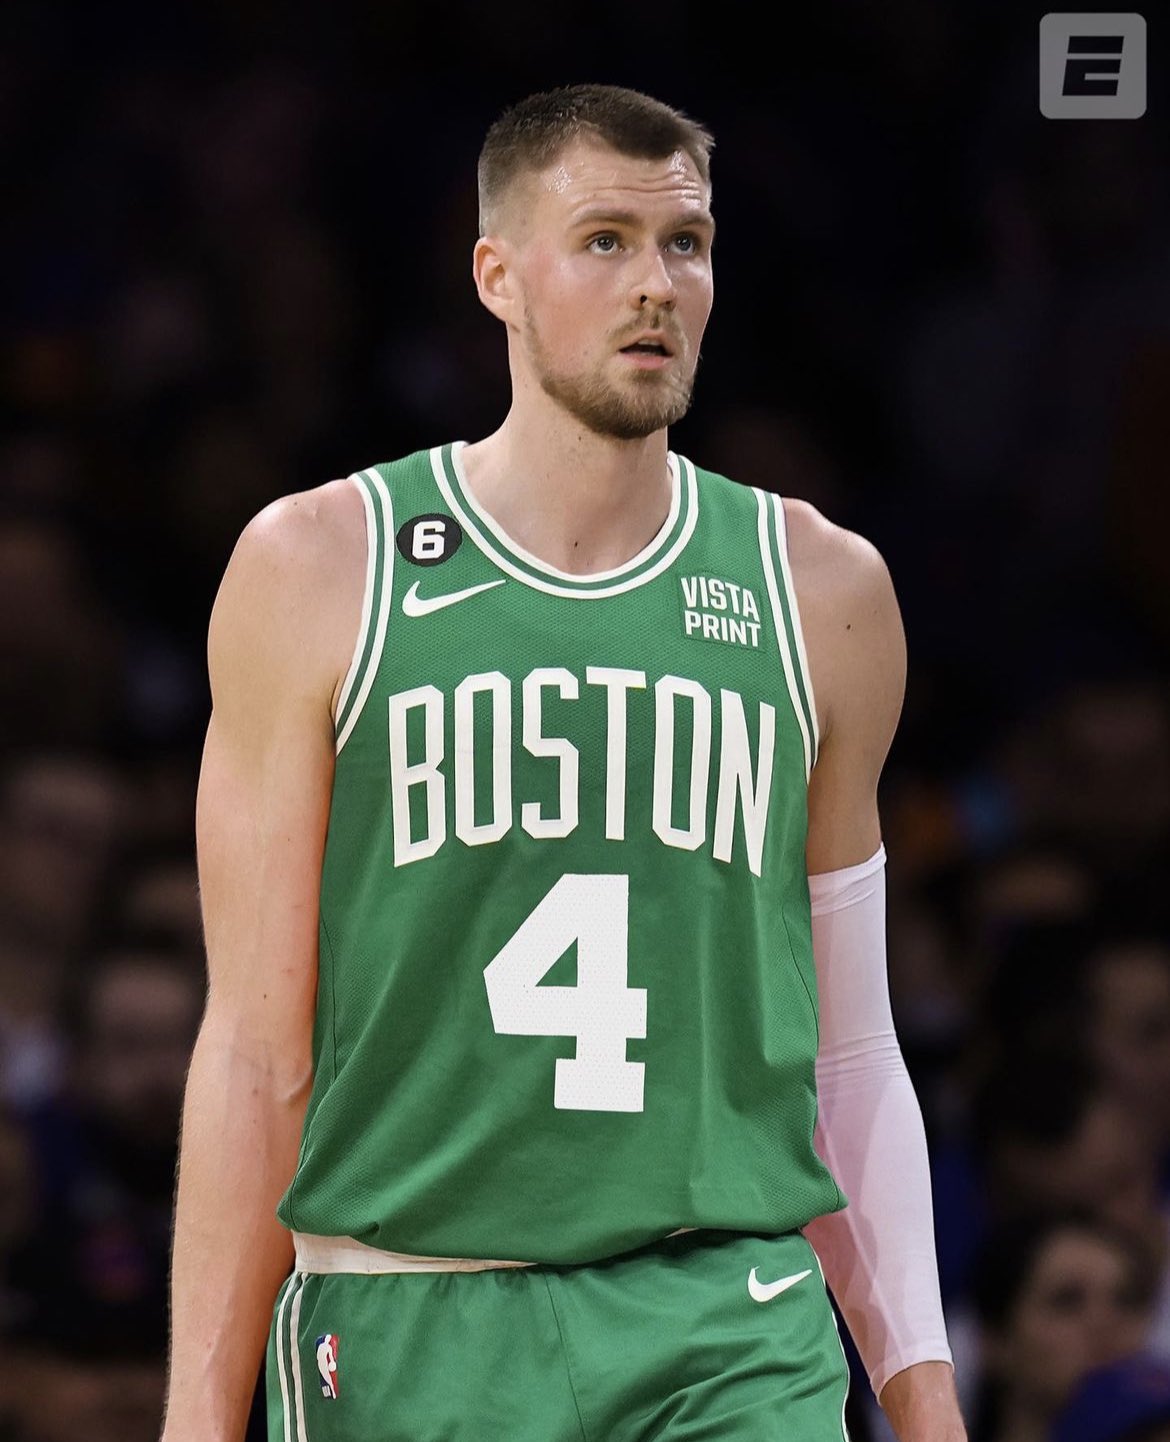 Why do the Boston Celtics wear the number 24?